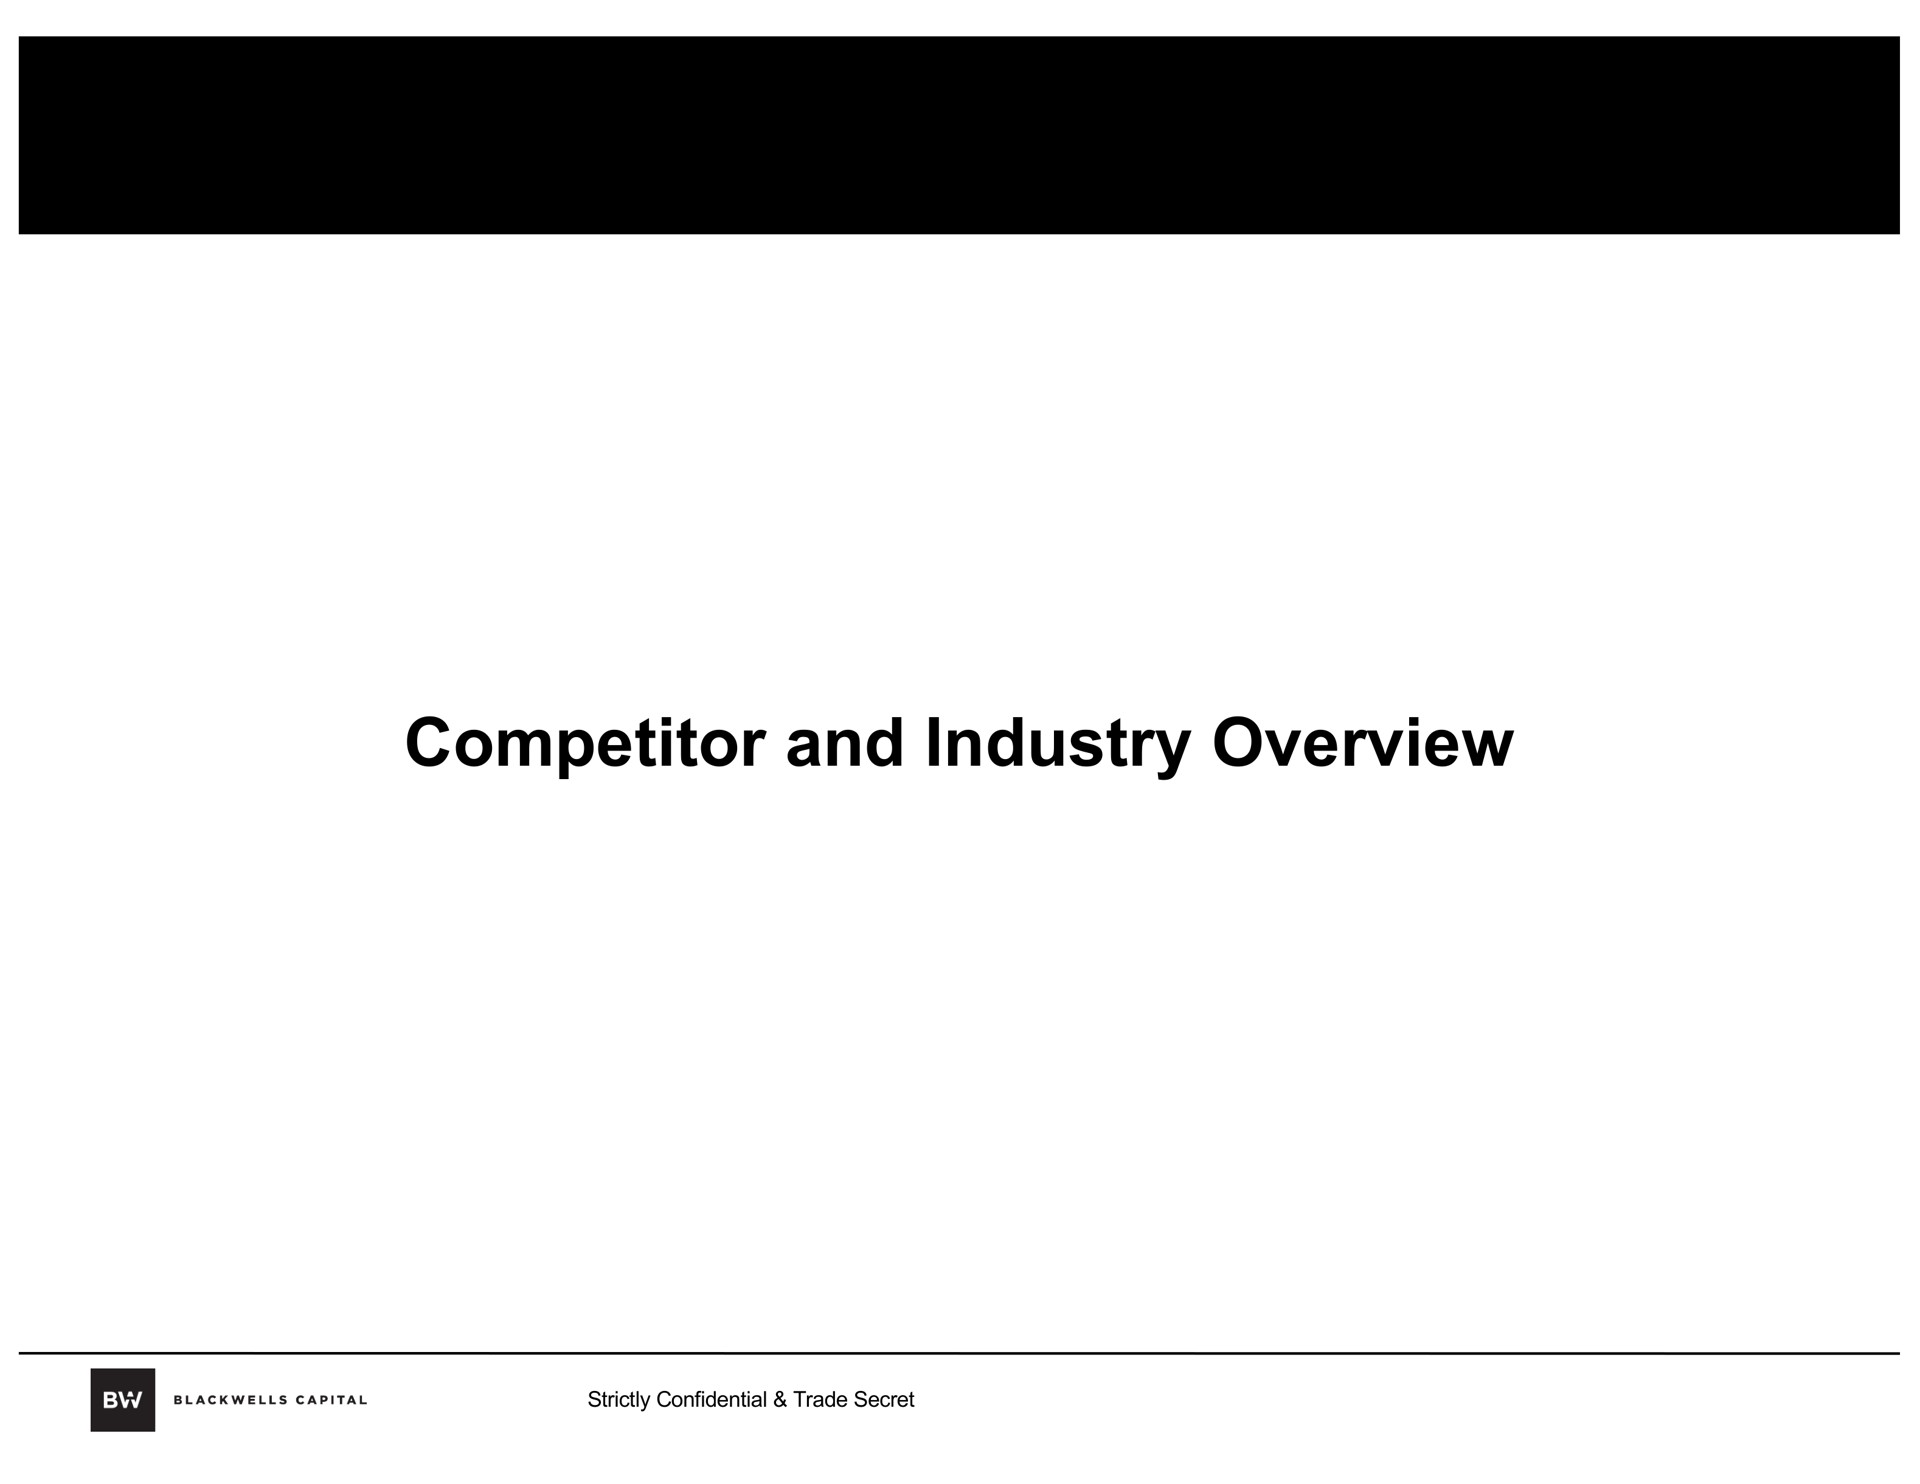 competitor and industry overview | Blackwells Capital